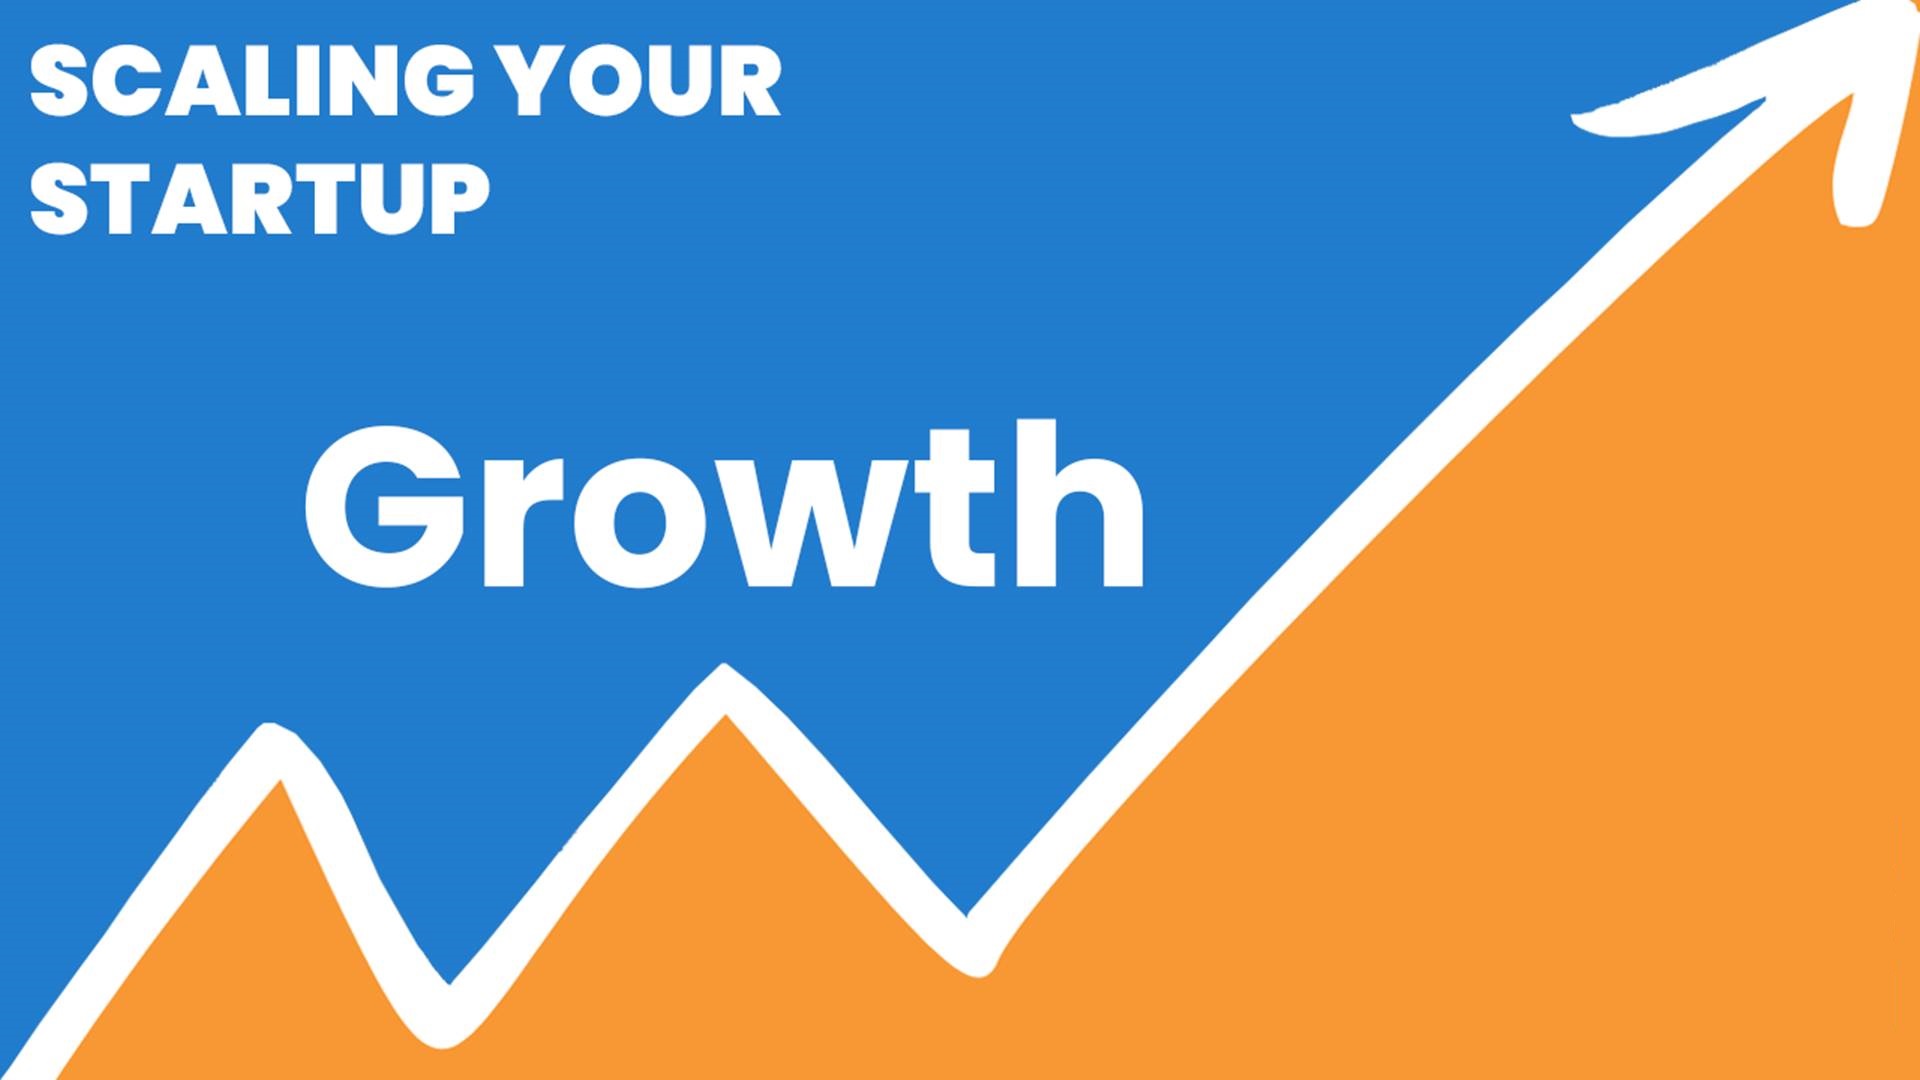 Scaling Your Startup: Growth